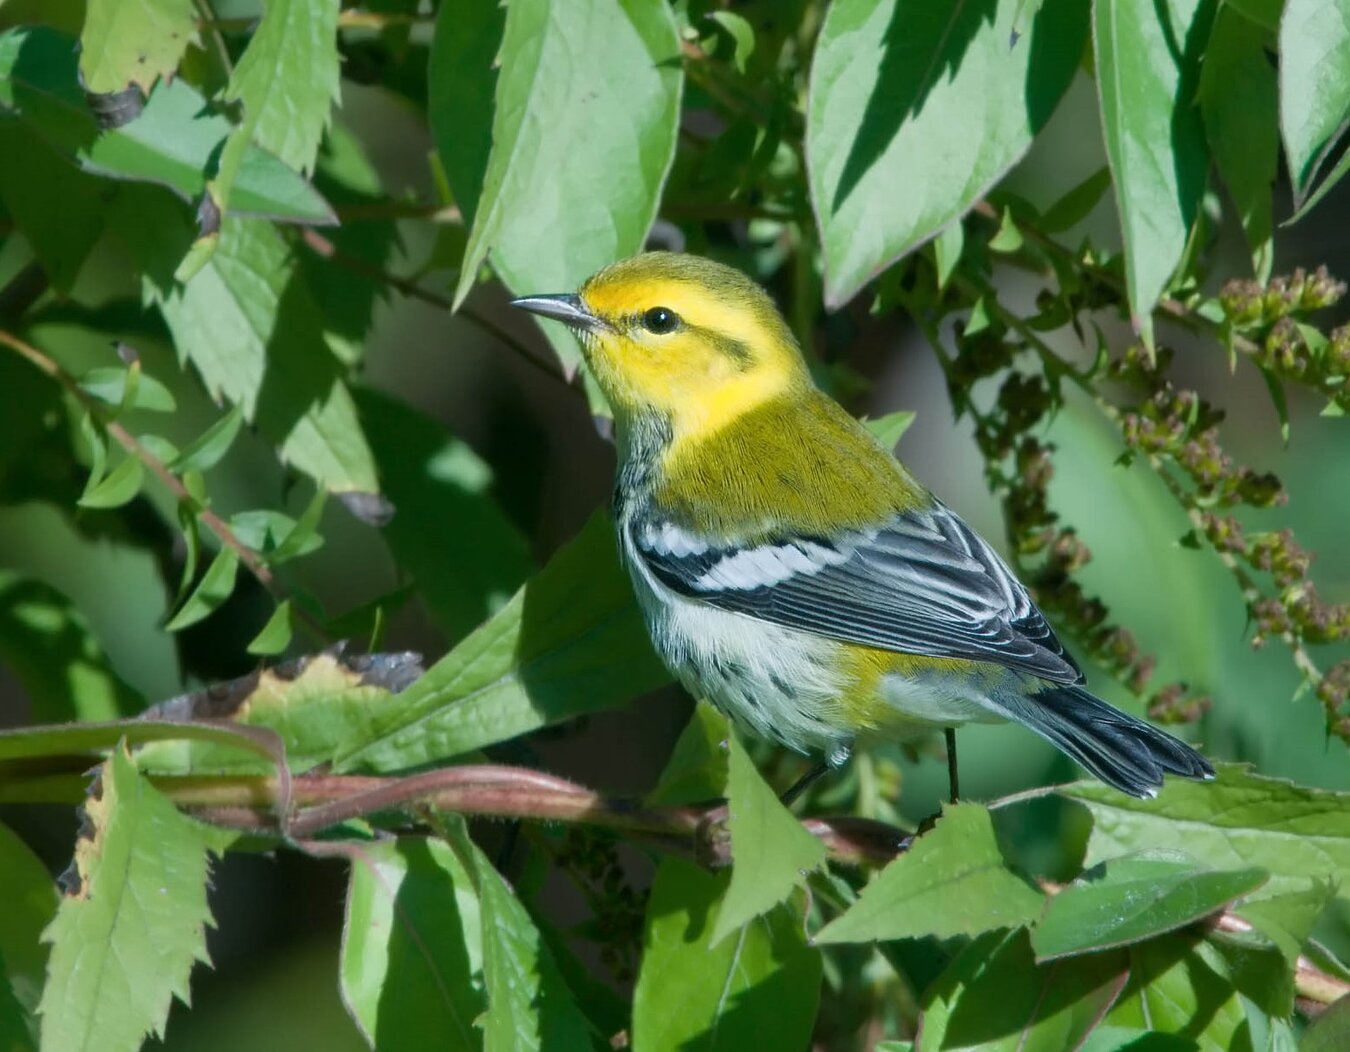 Migrants like the Black-throated Green Warbler frequently stop through Highbridge Park. Photo: Kelly Colgan Azar/CC BY-ND 2.0